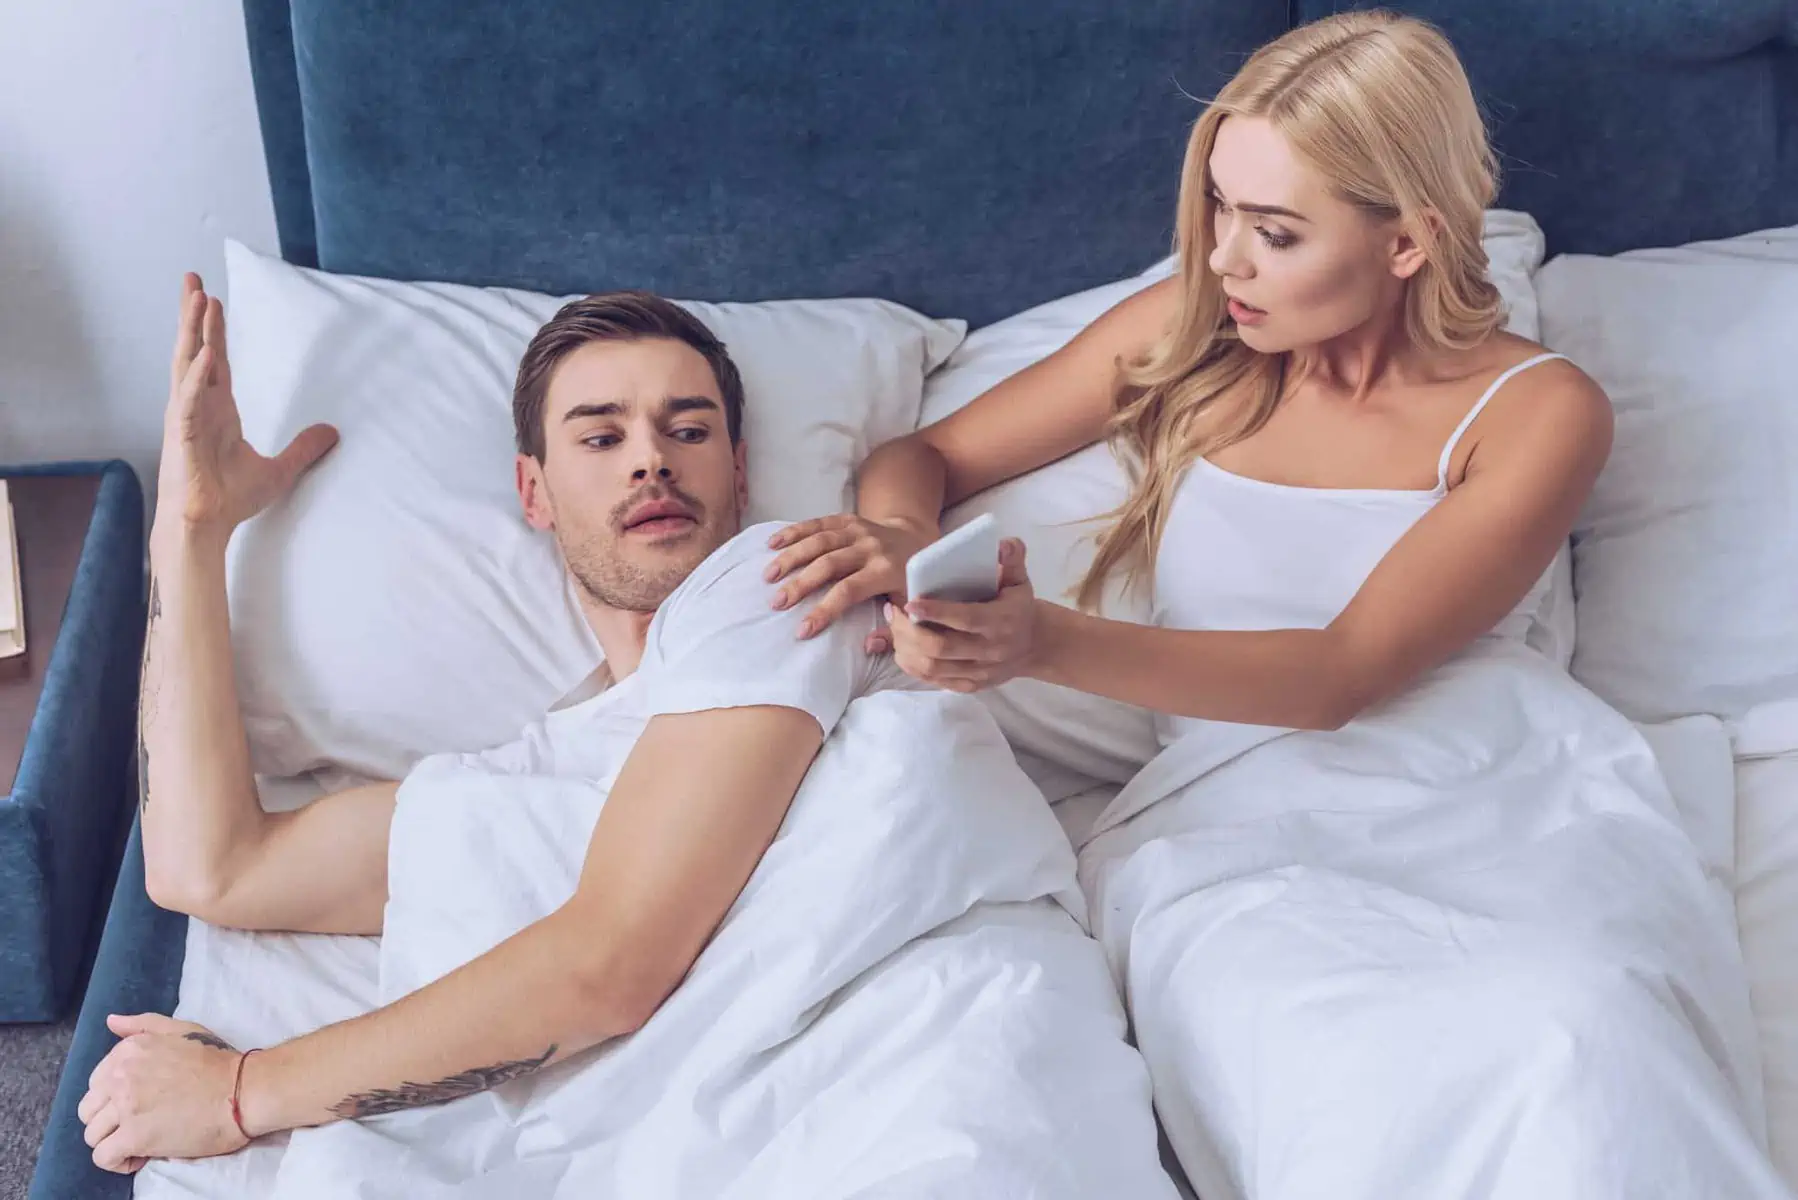 A man laying in bed next to a woman using a cell phone